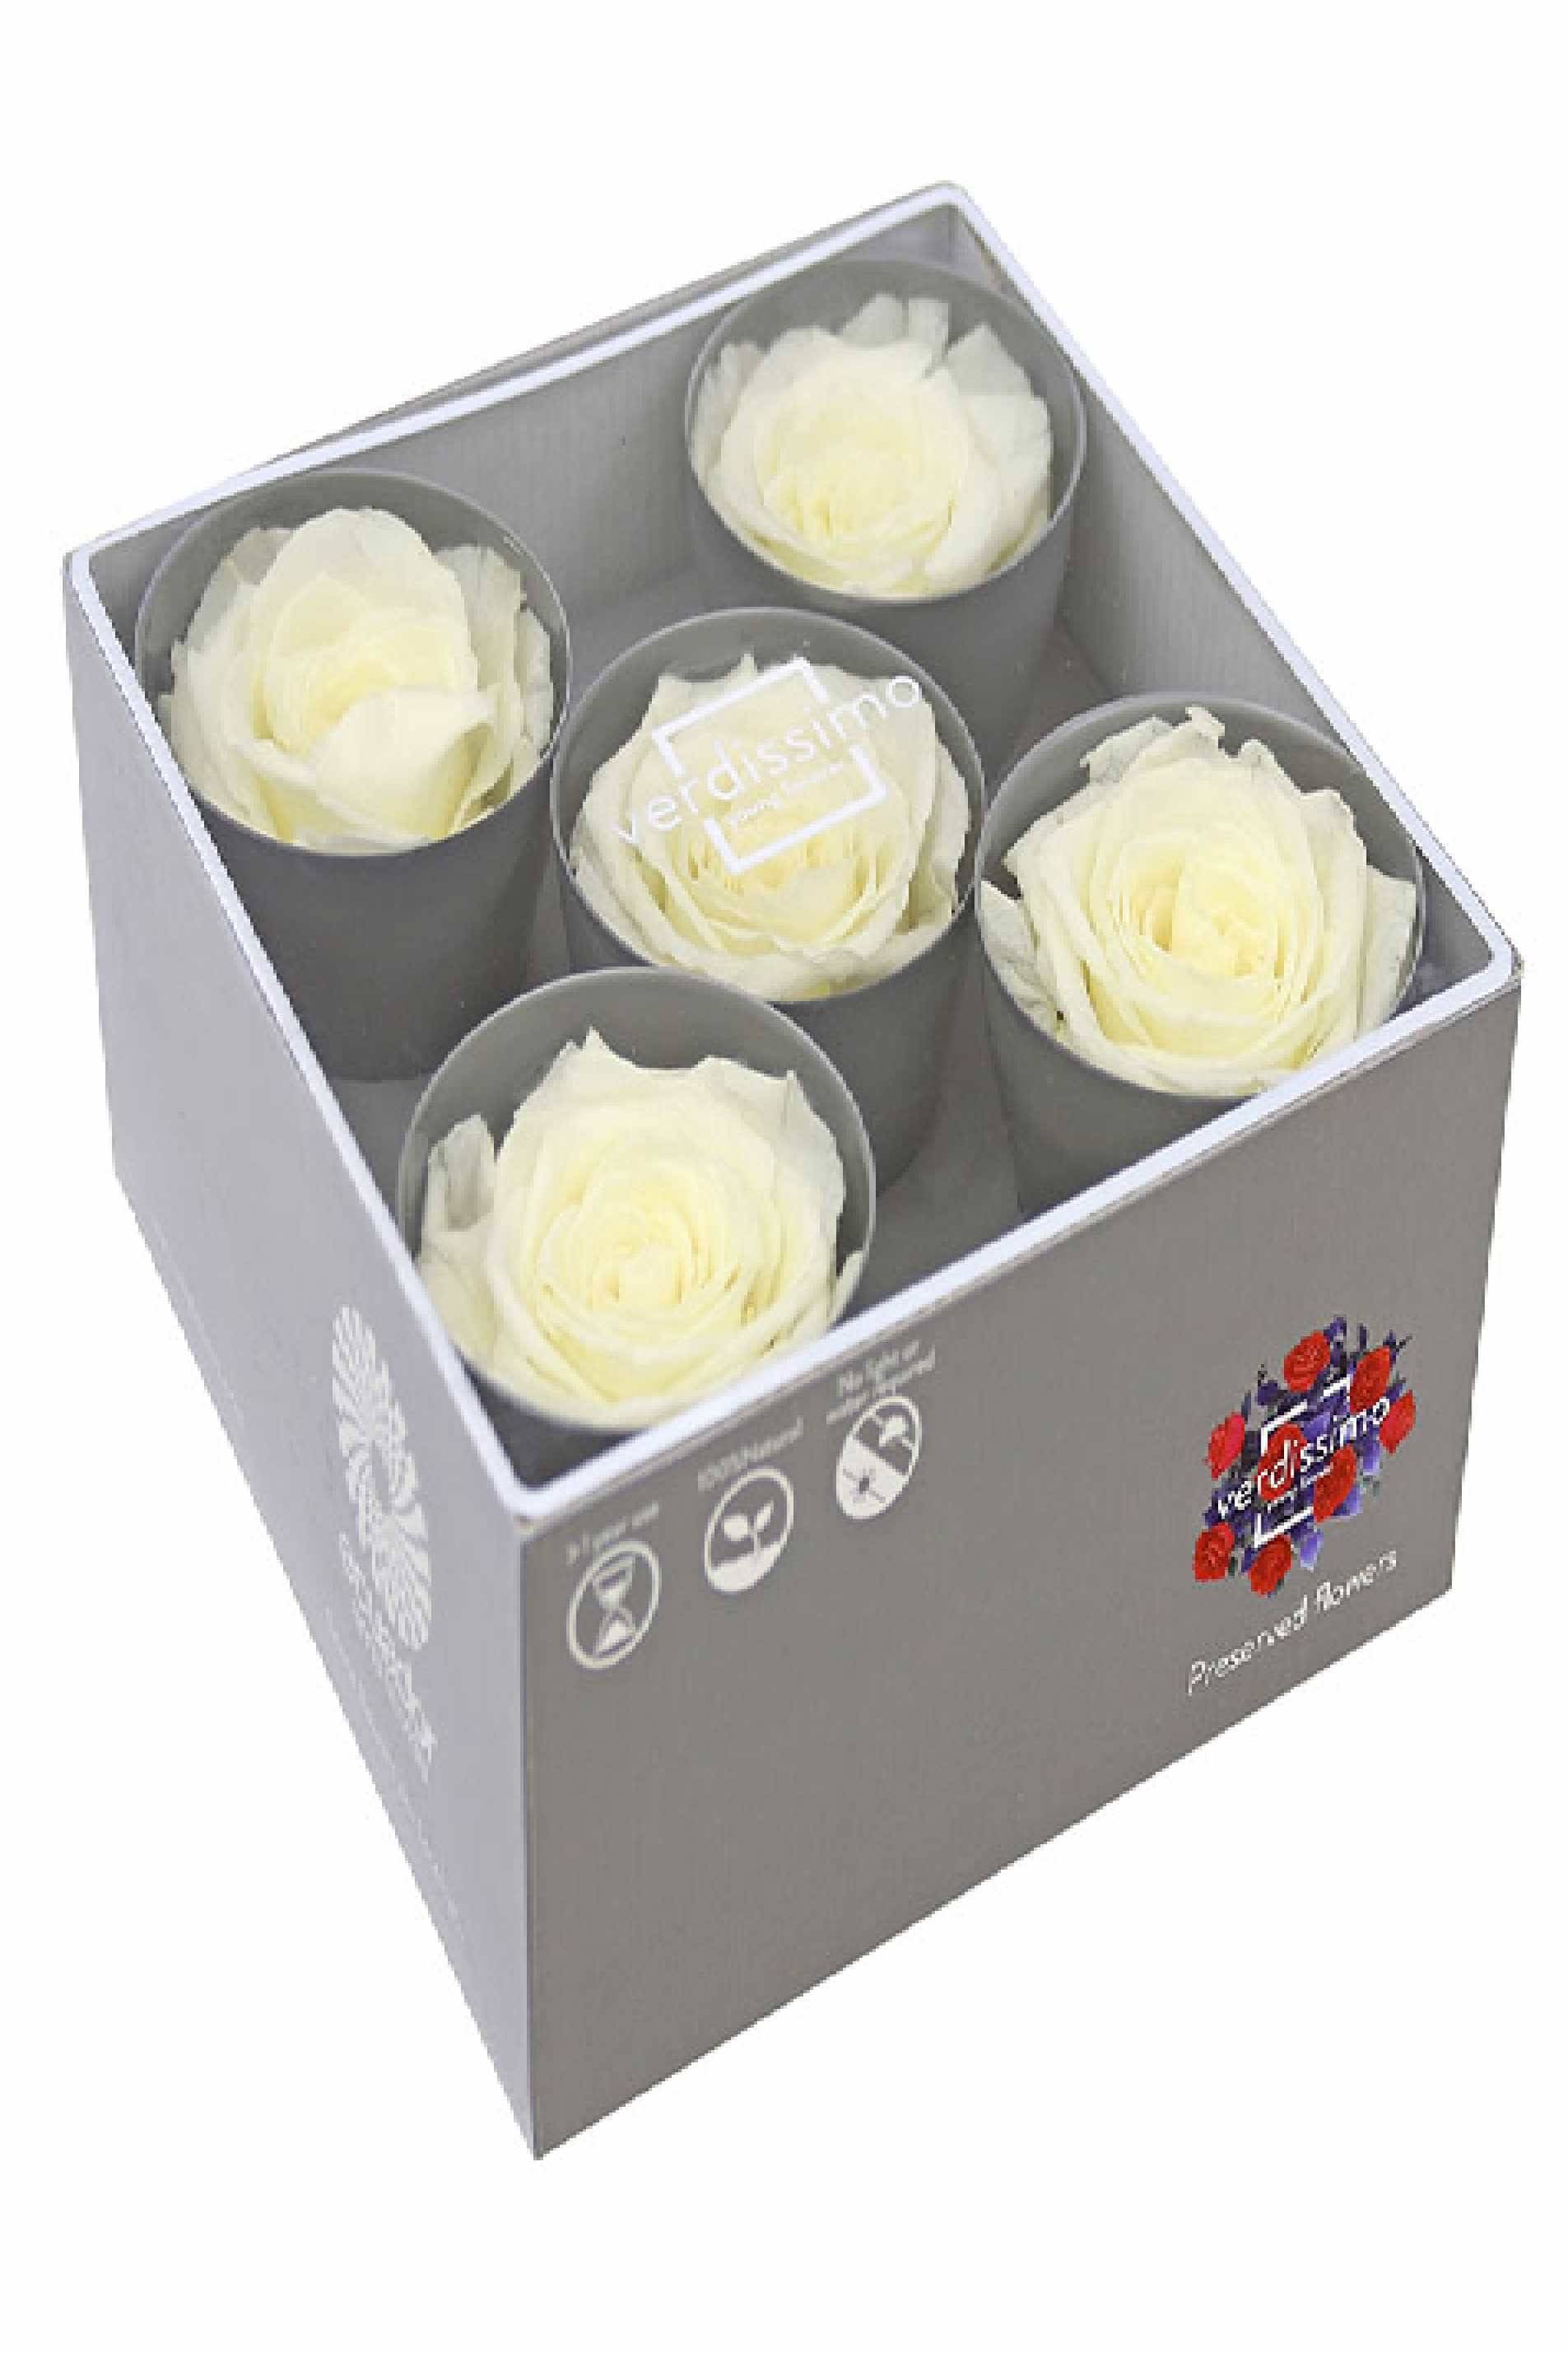 Preserved Roses Champagne 5pcs in Box